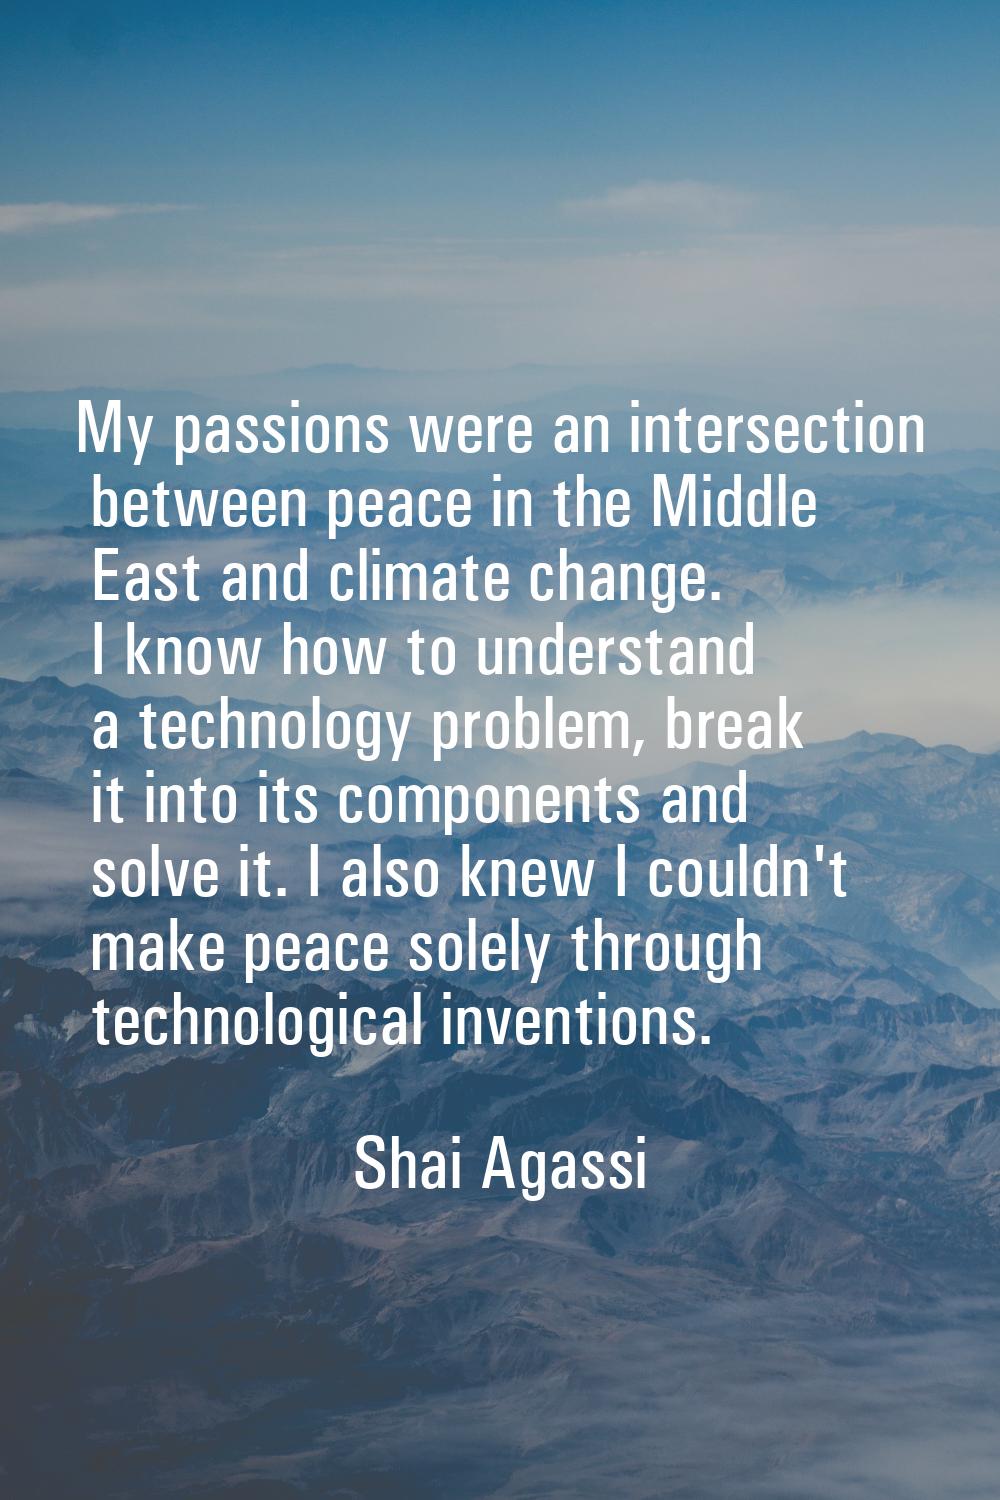 My passions were an intersection between peace in the Middle East and climate change. I know how to